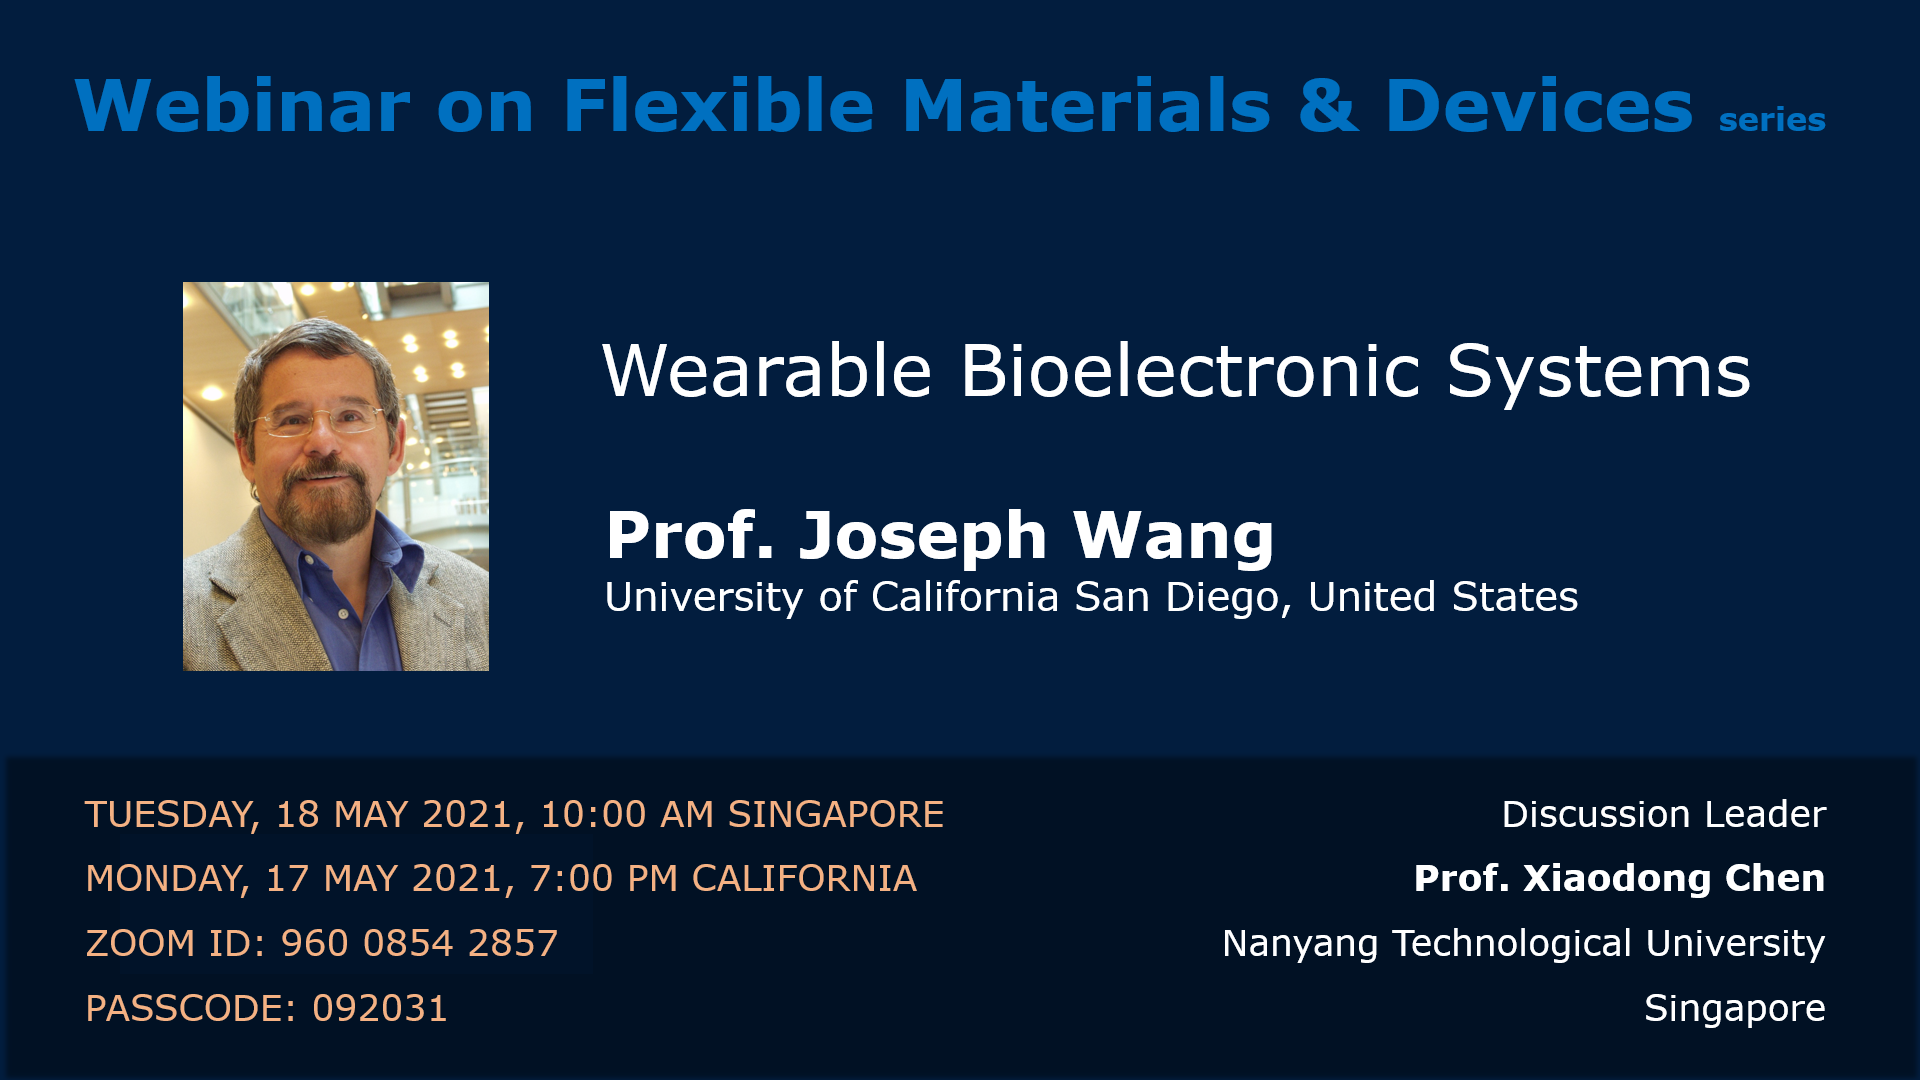 EDM - Wearable Bioelectronic Systems